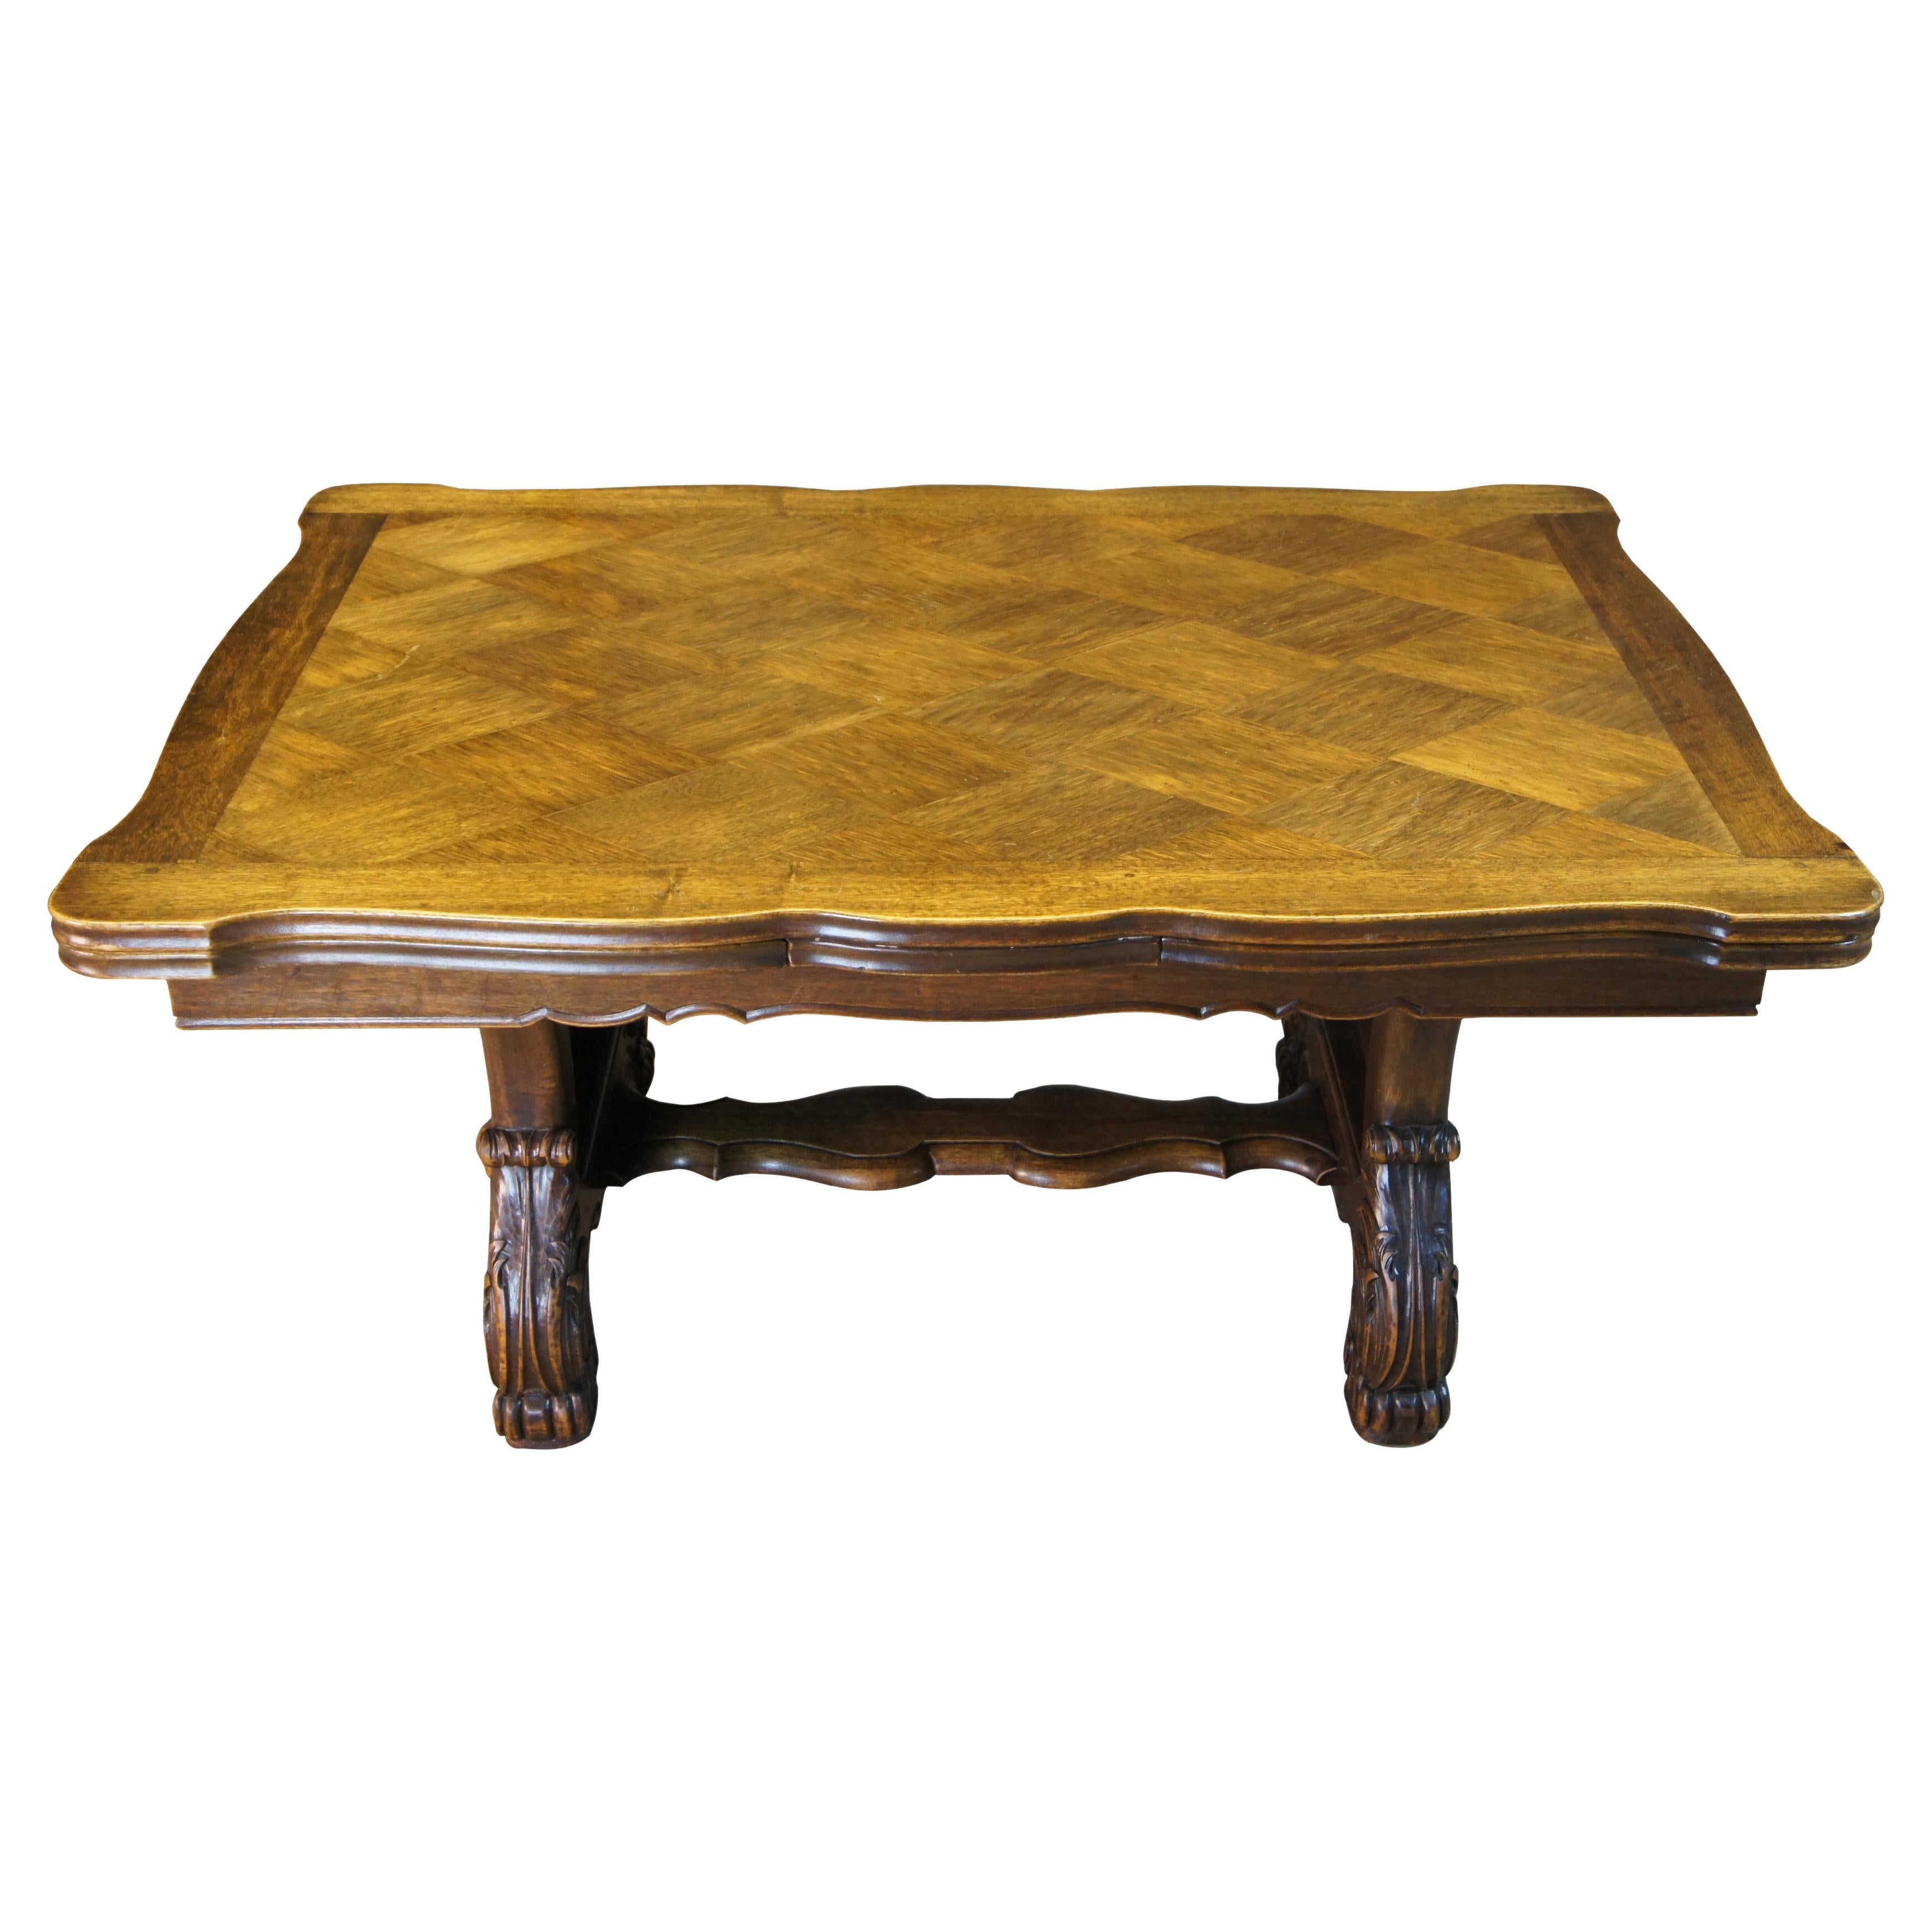 Antique French Walnut Carved Draw Leaf Extendable Dining Table Parquetry Top 106